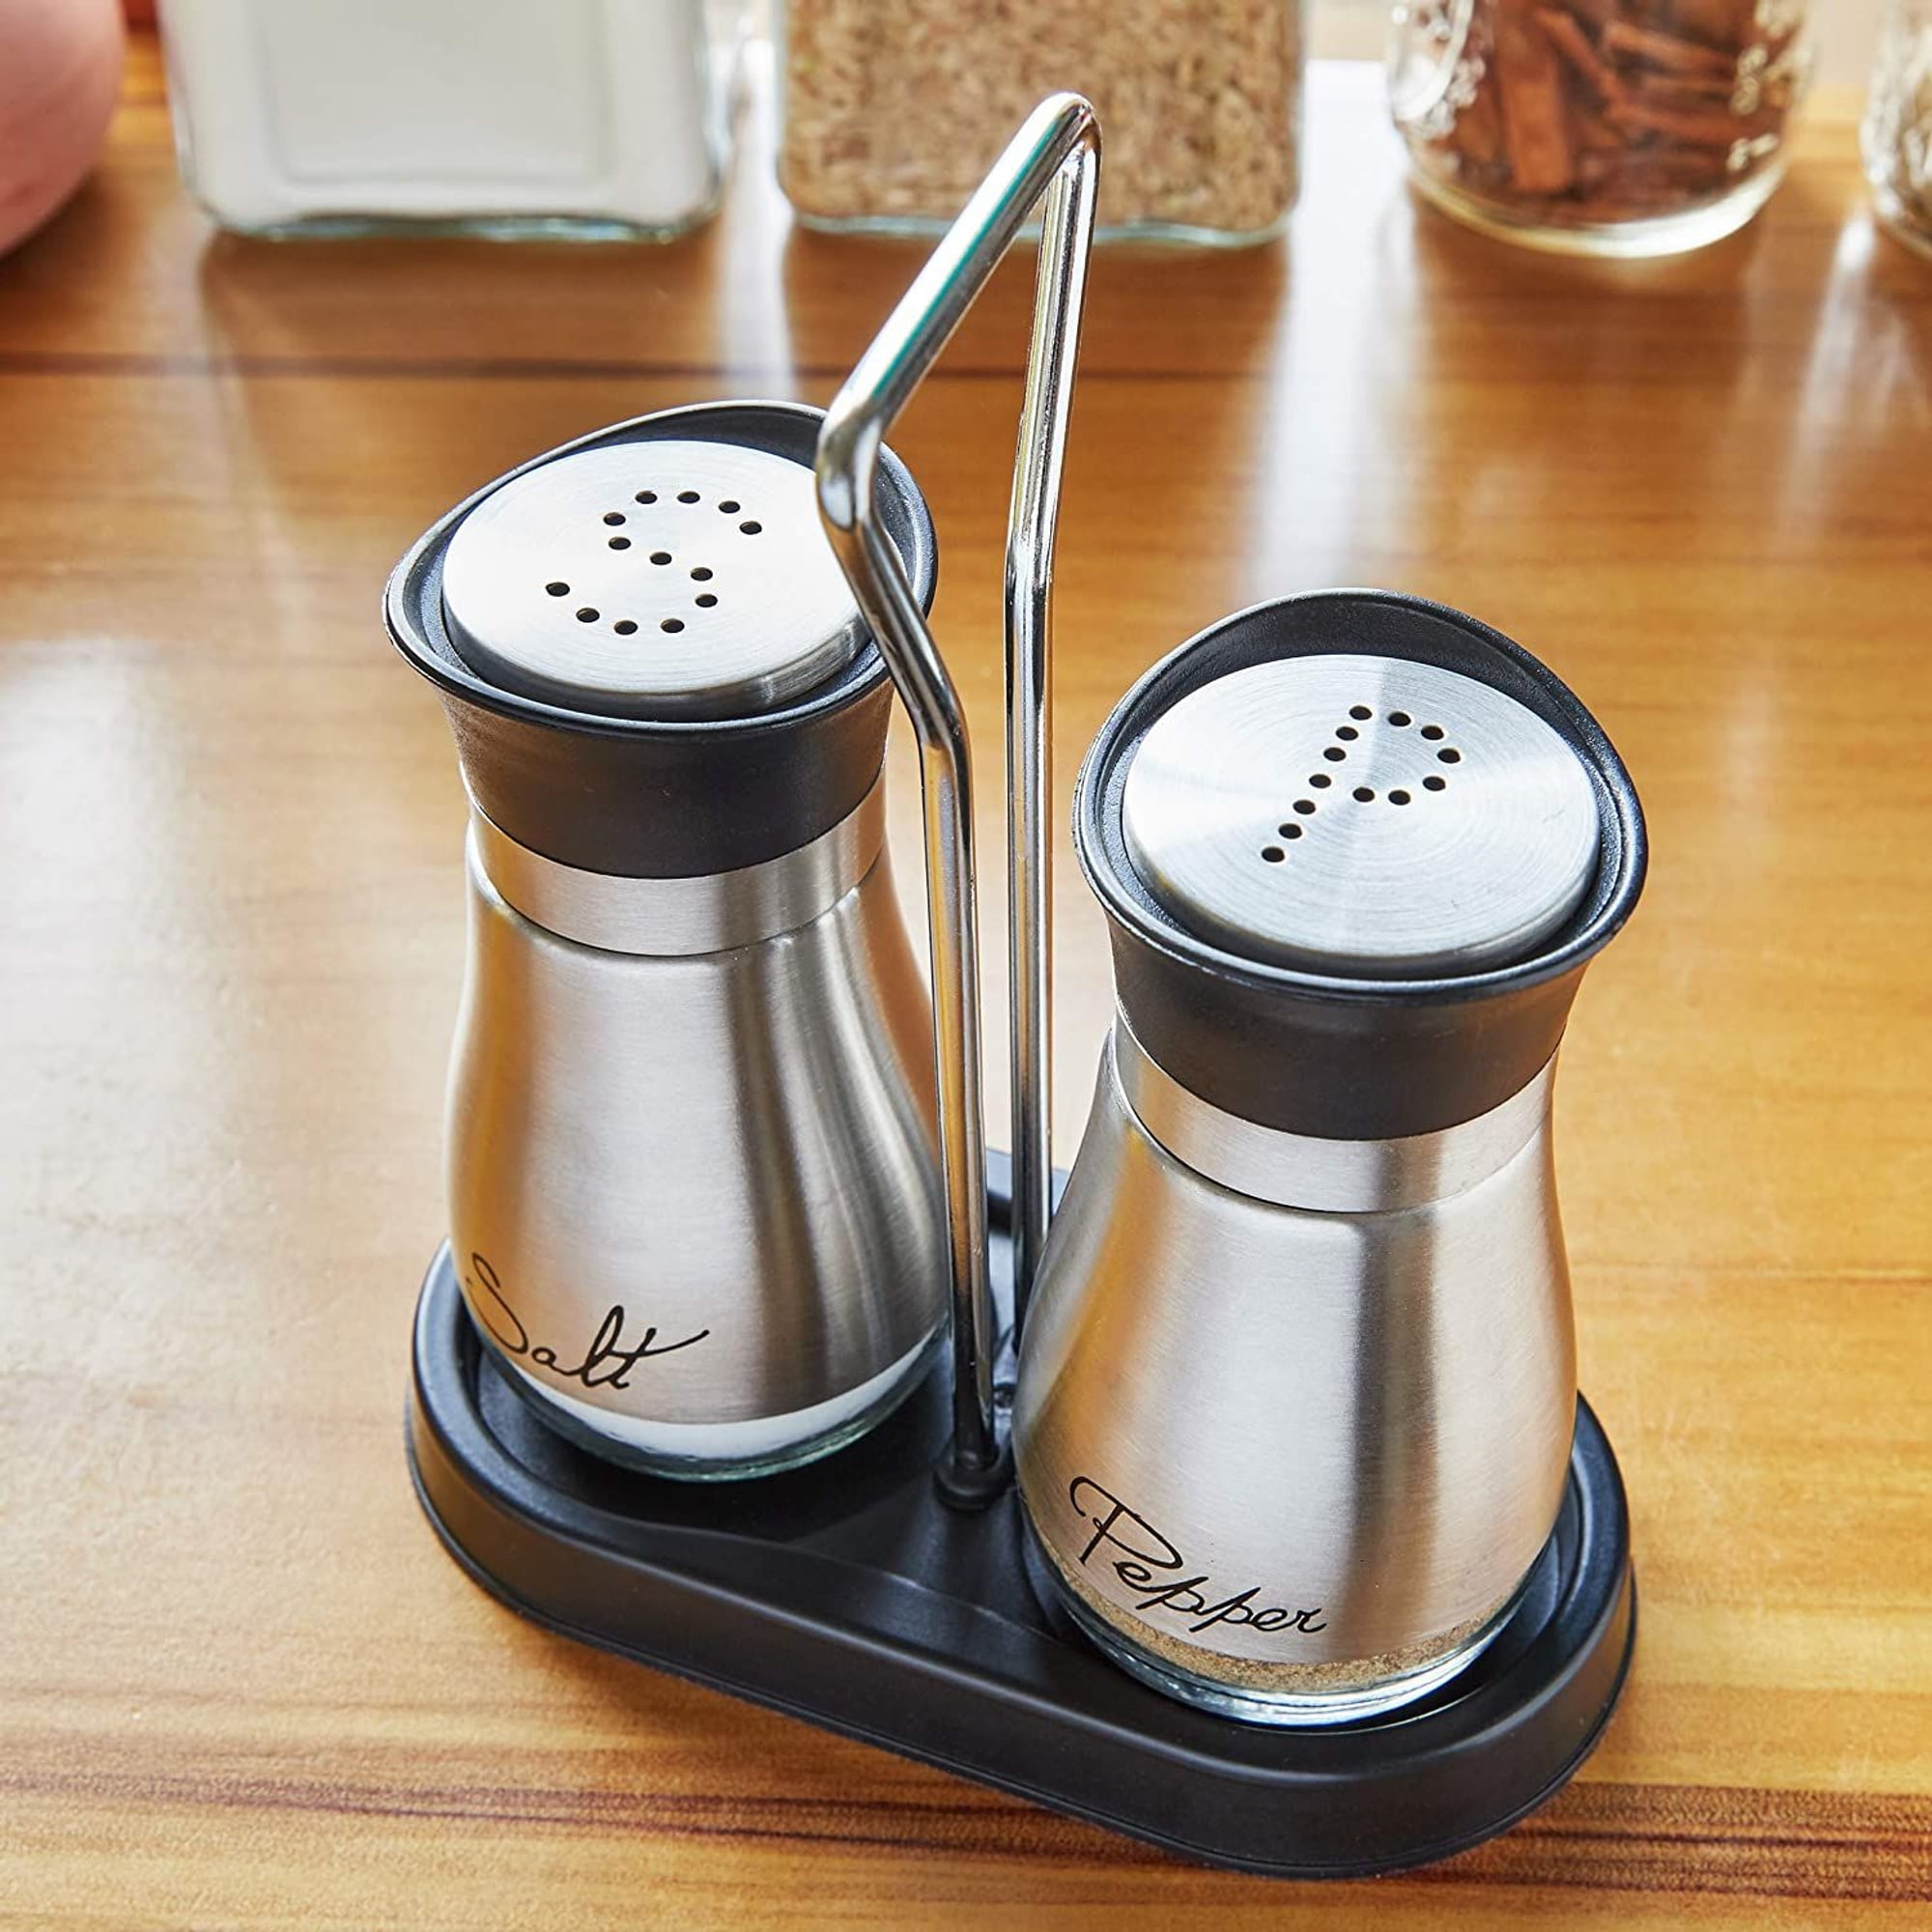 Arrozon Salt and Pepper Shakers Set,4 oz Glass Bottom Salt Pepper Shaker with Stainless Steel Lid for Kitchen Cooking Table, RV, Camp,BBQ Refillable